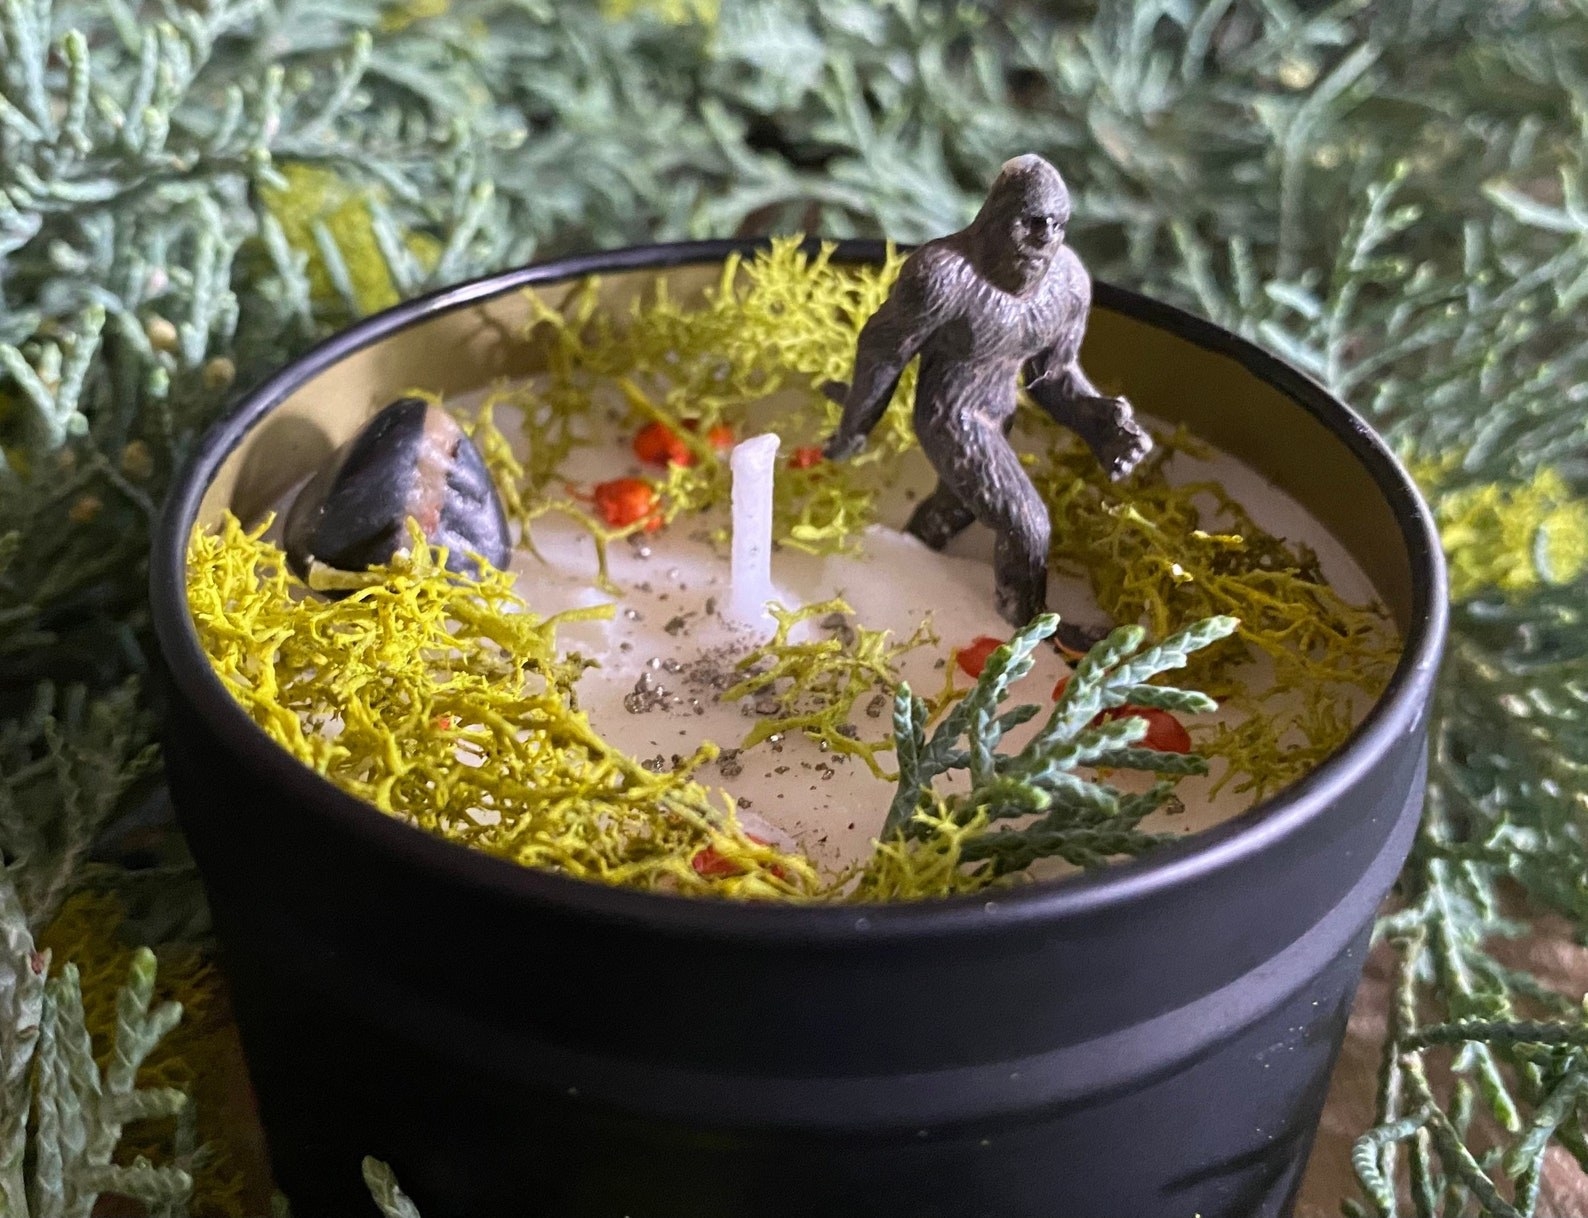 The Sasquatch candle surrounded by greenery